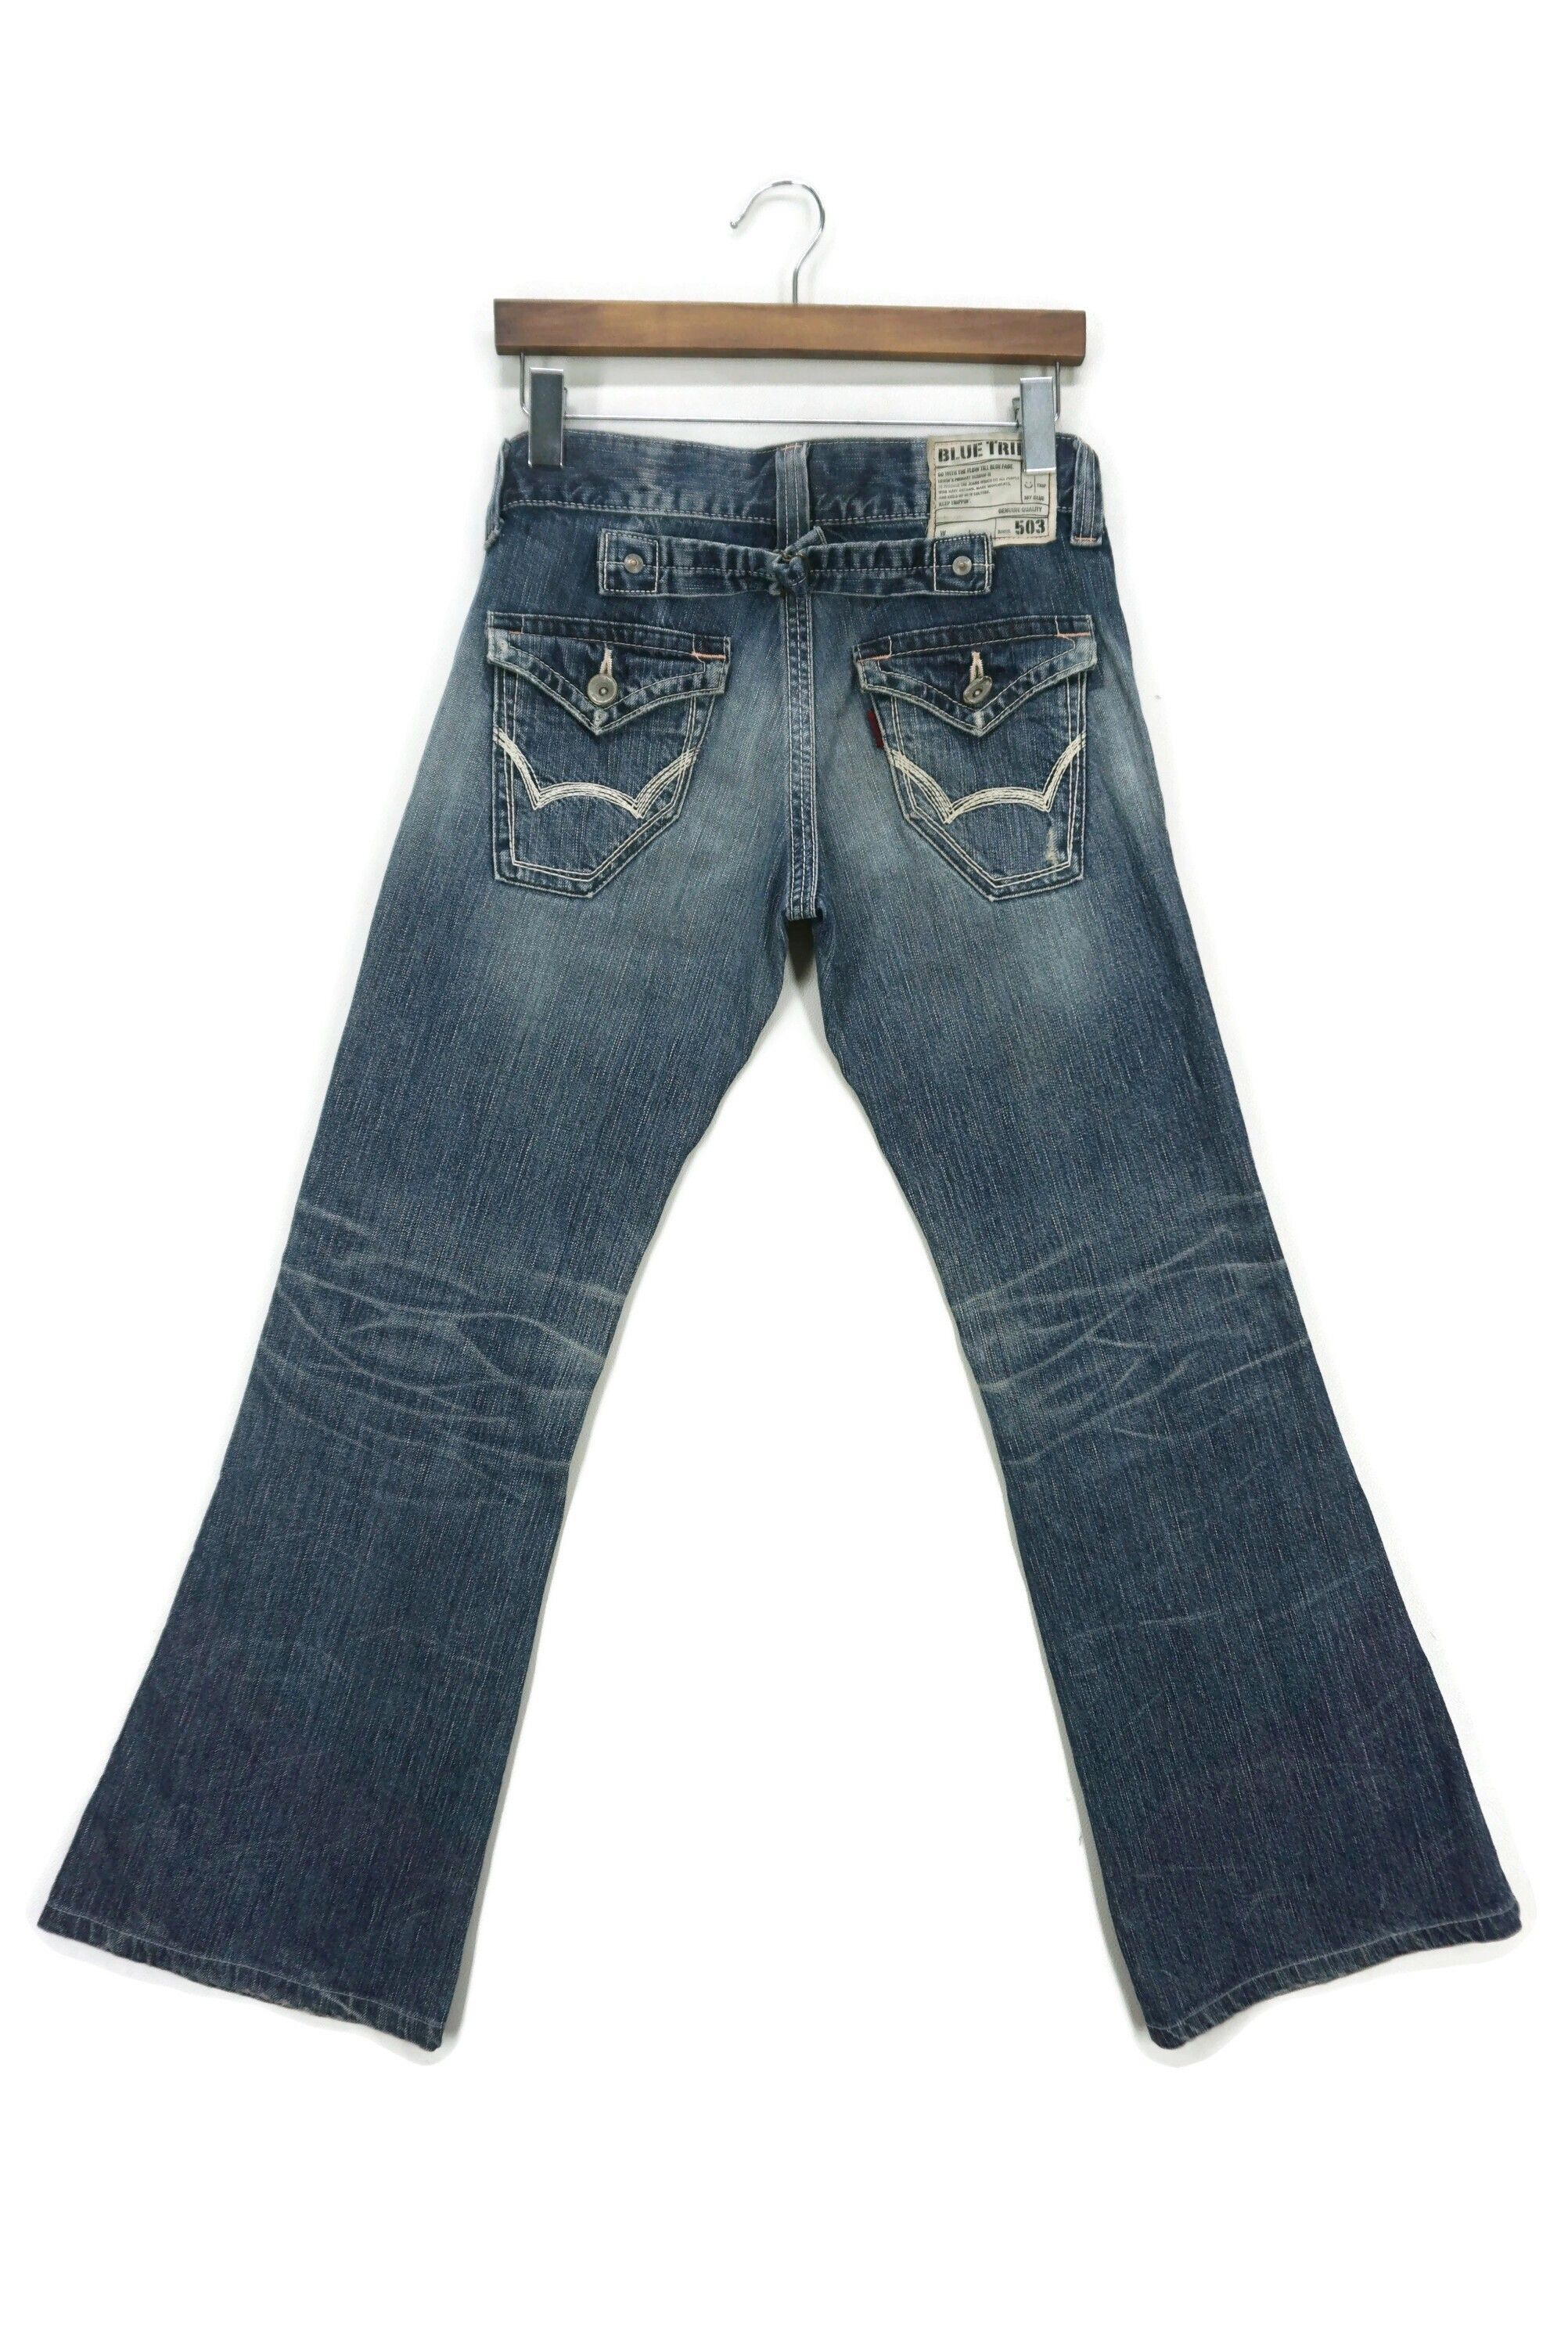 Edwin Blue Trip 503 Bootcut Flare Buckle Back Pants Made in Japan | Grailed